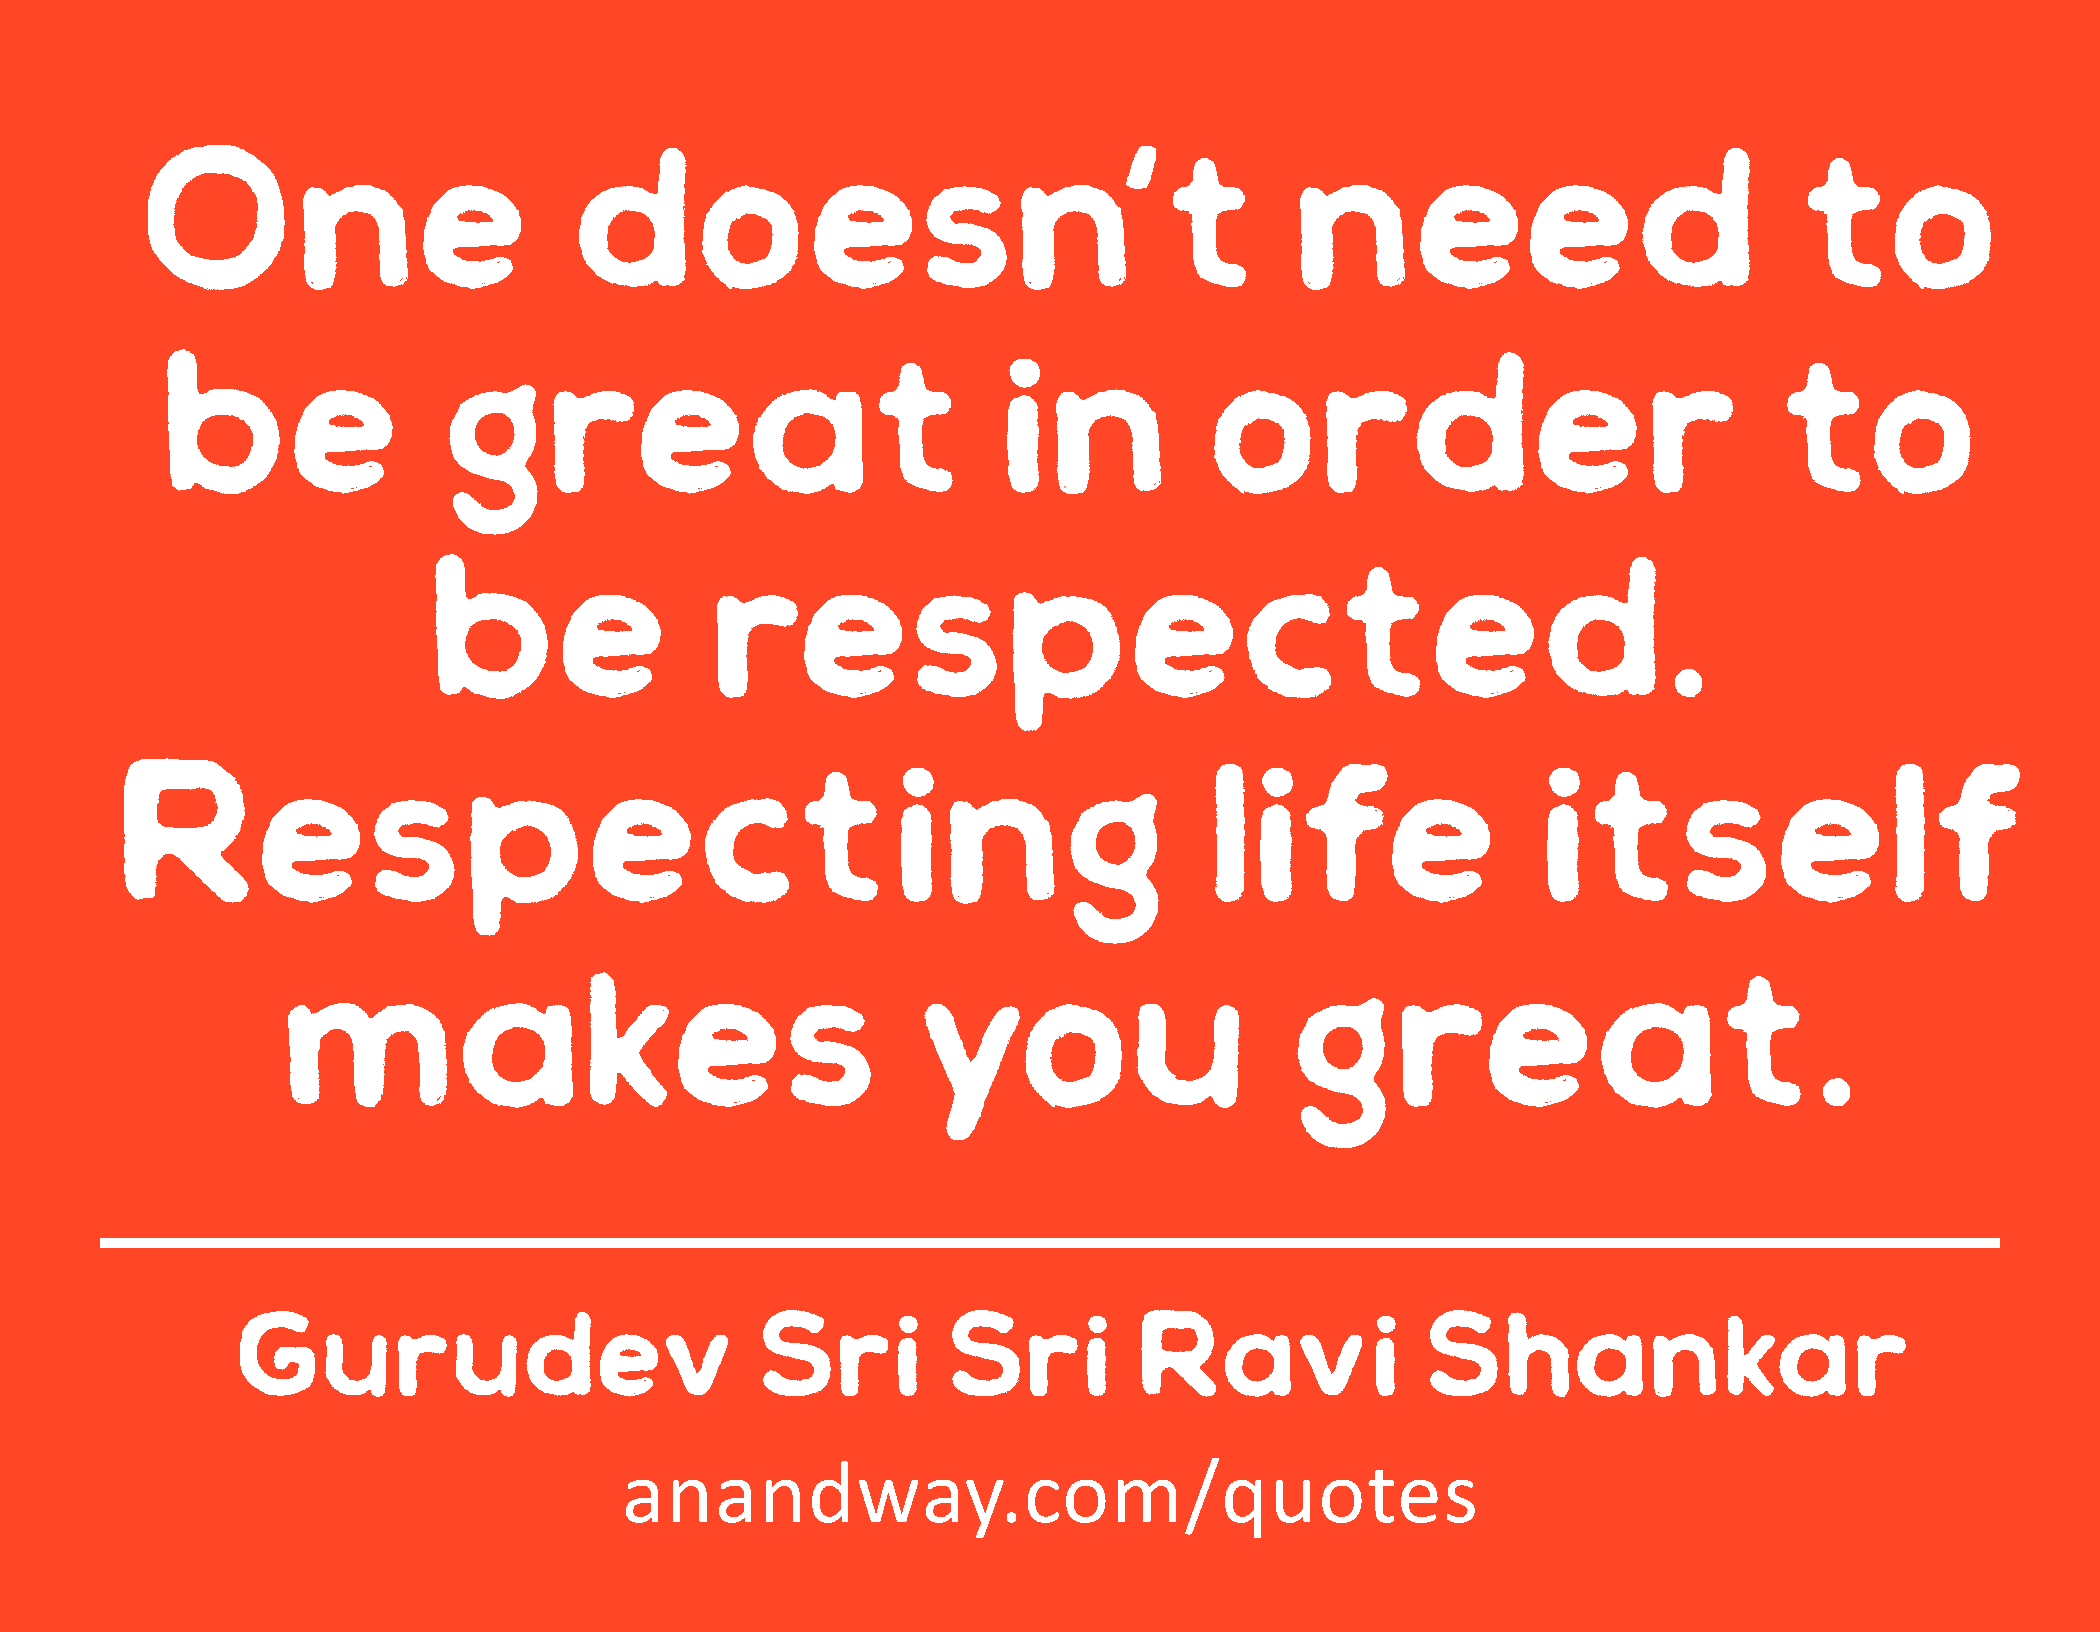 One doesn't need to be great in order to be respected. Respecting life itself makes you great. 
 -Gurudev Sri Sri Ravi Shankar